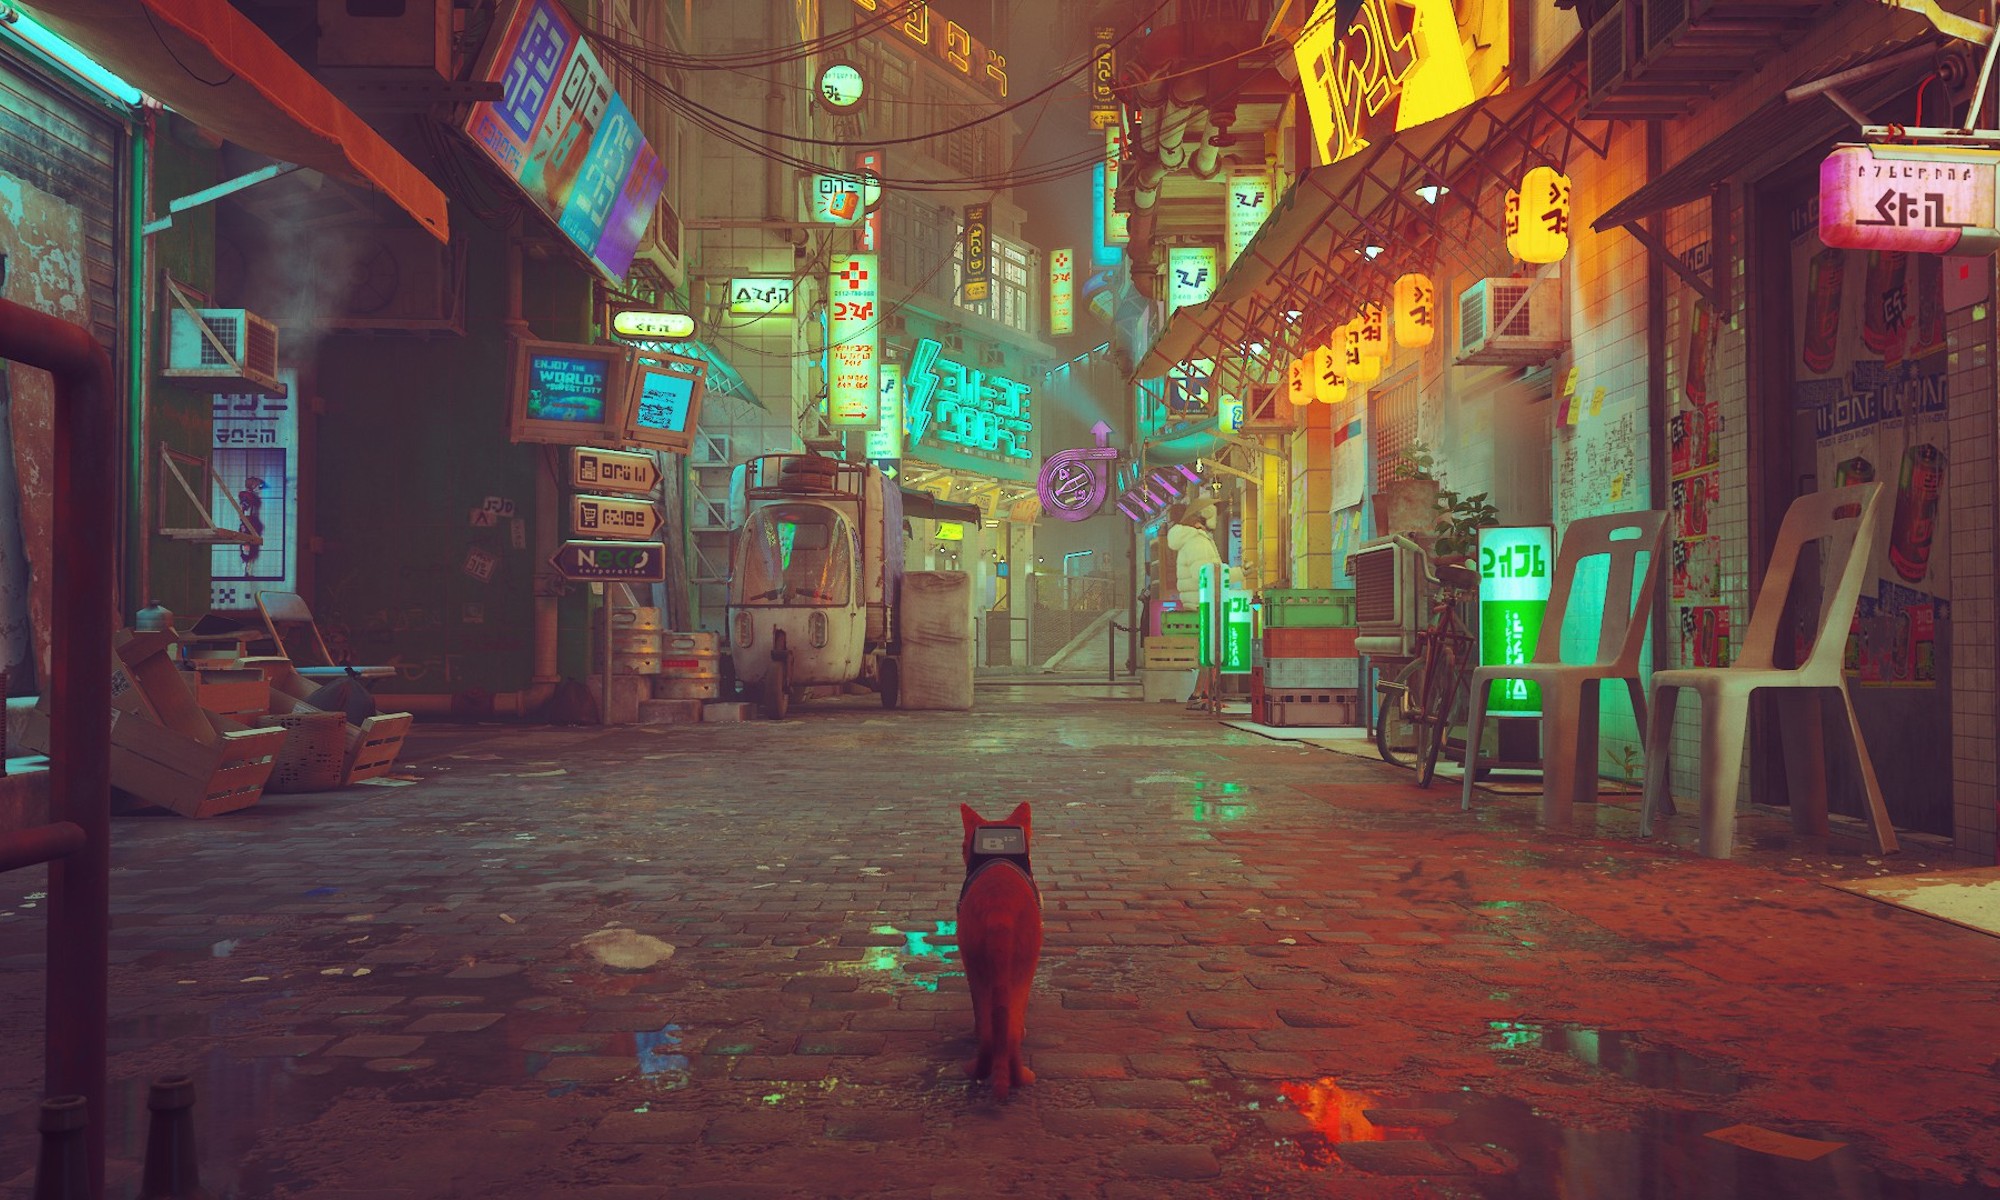 Cyberpunk cat adventure 'Stray' heads to Xbox on August 10th